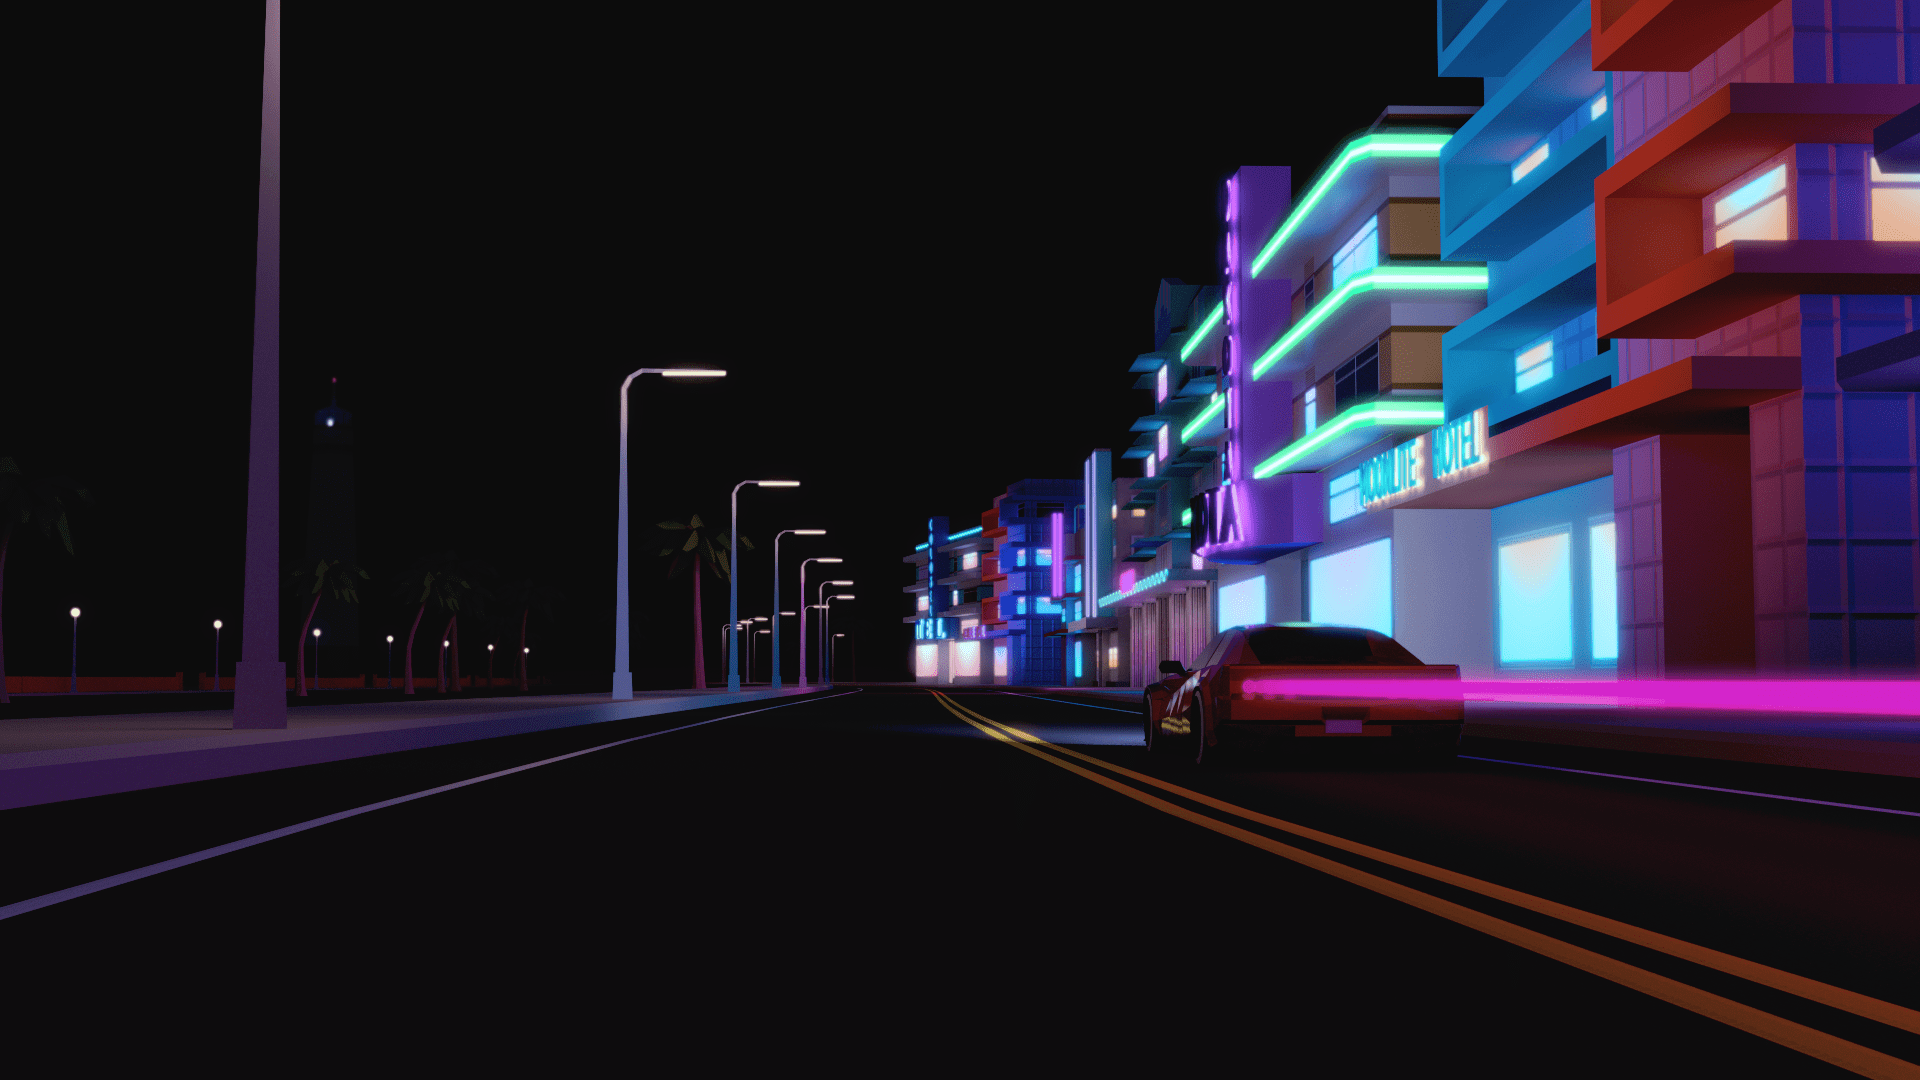 Vice City 4K Wallpapers - Top Free Vice City 4K Backgrounds